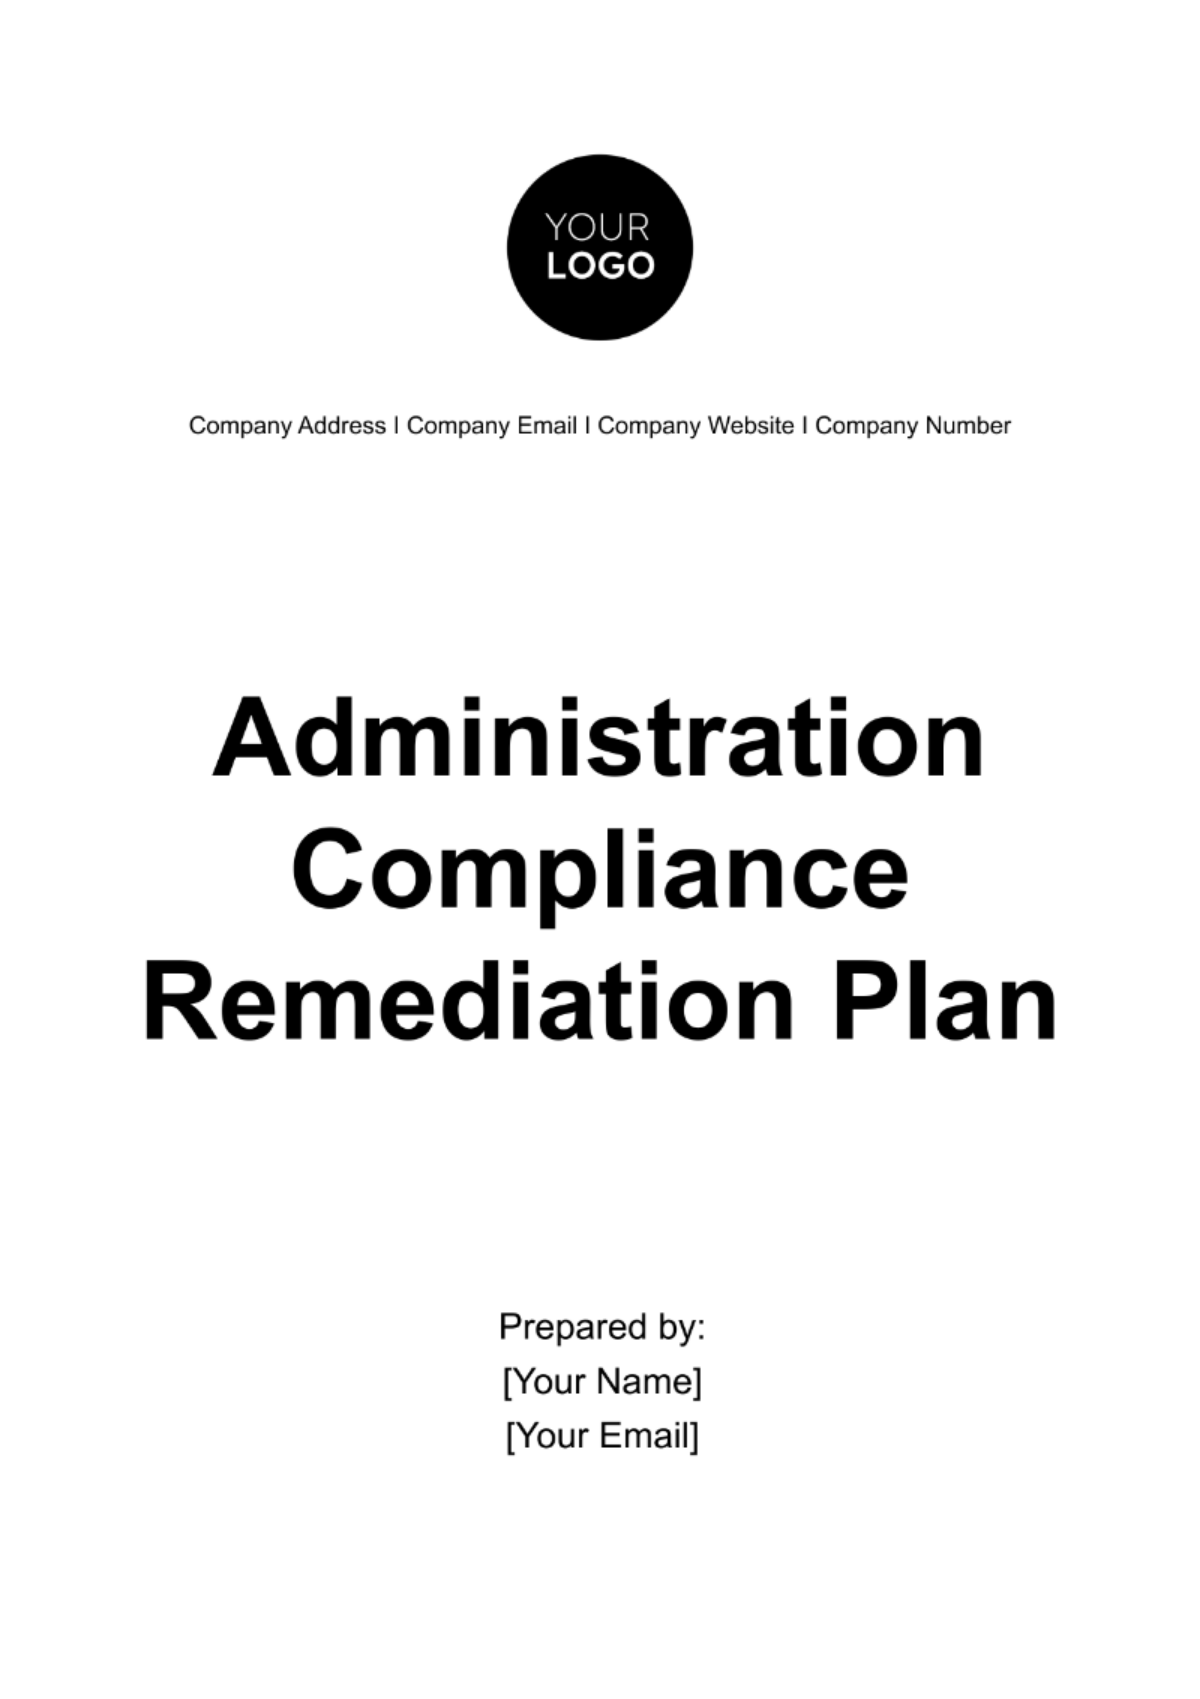 Administration Compliance Remediation Plan Template